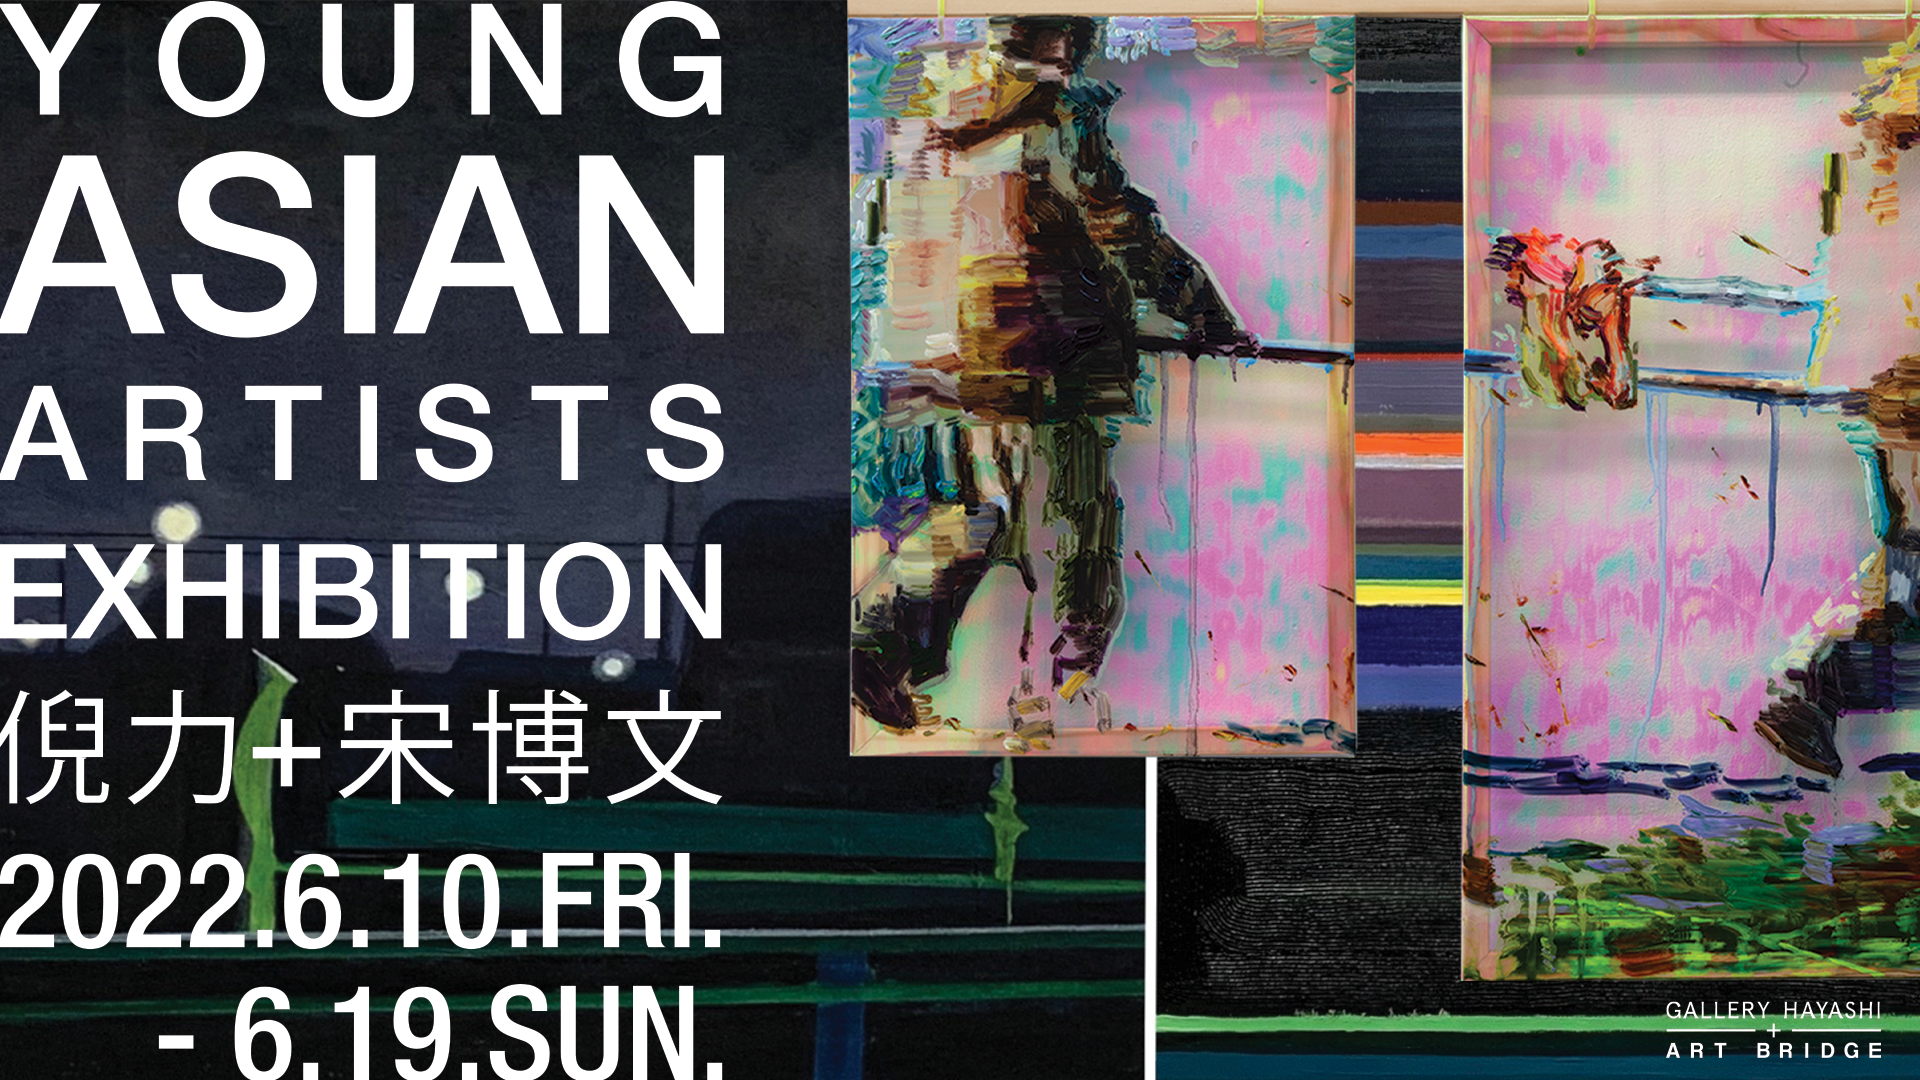 YOUNG ASIAN ARTISTS EXHIBITION 2022